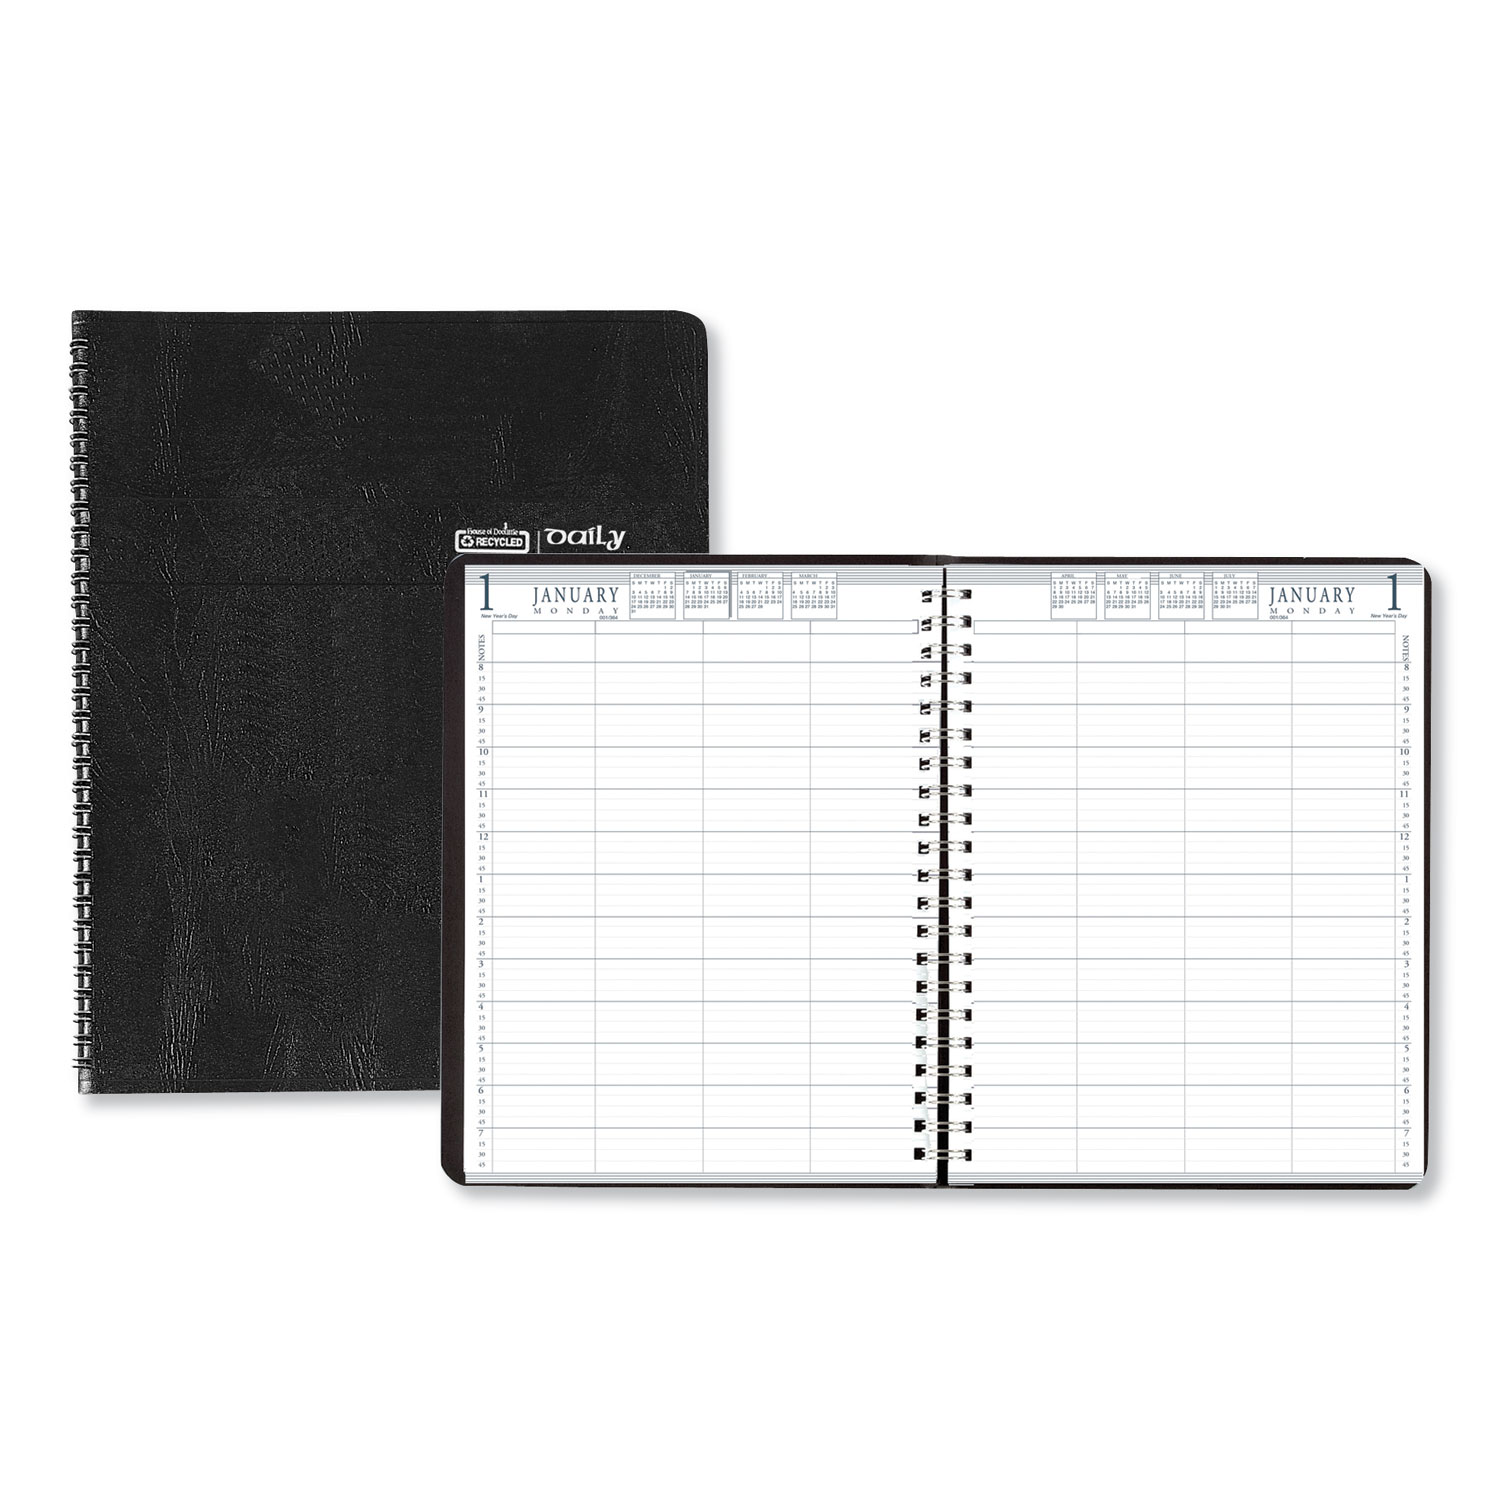 Eight-Person Group Practice Daily Appointment Book, 11 x 8.5, Black, 2022